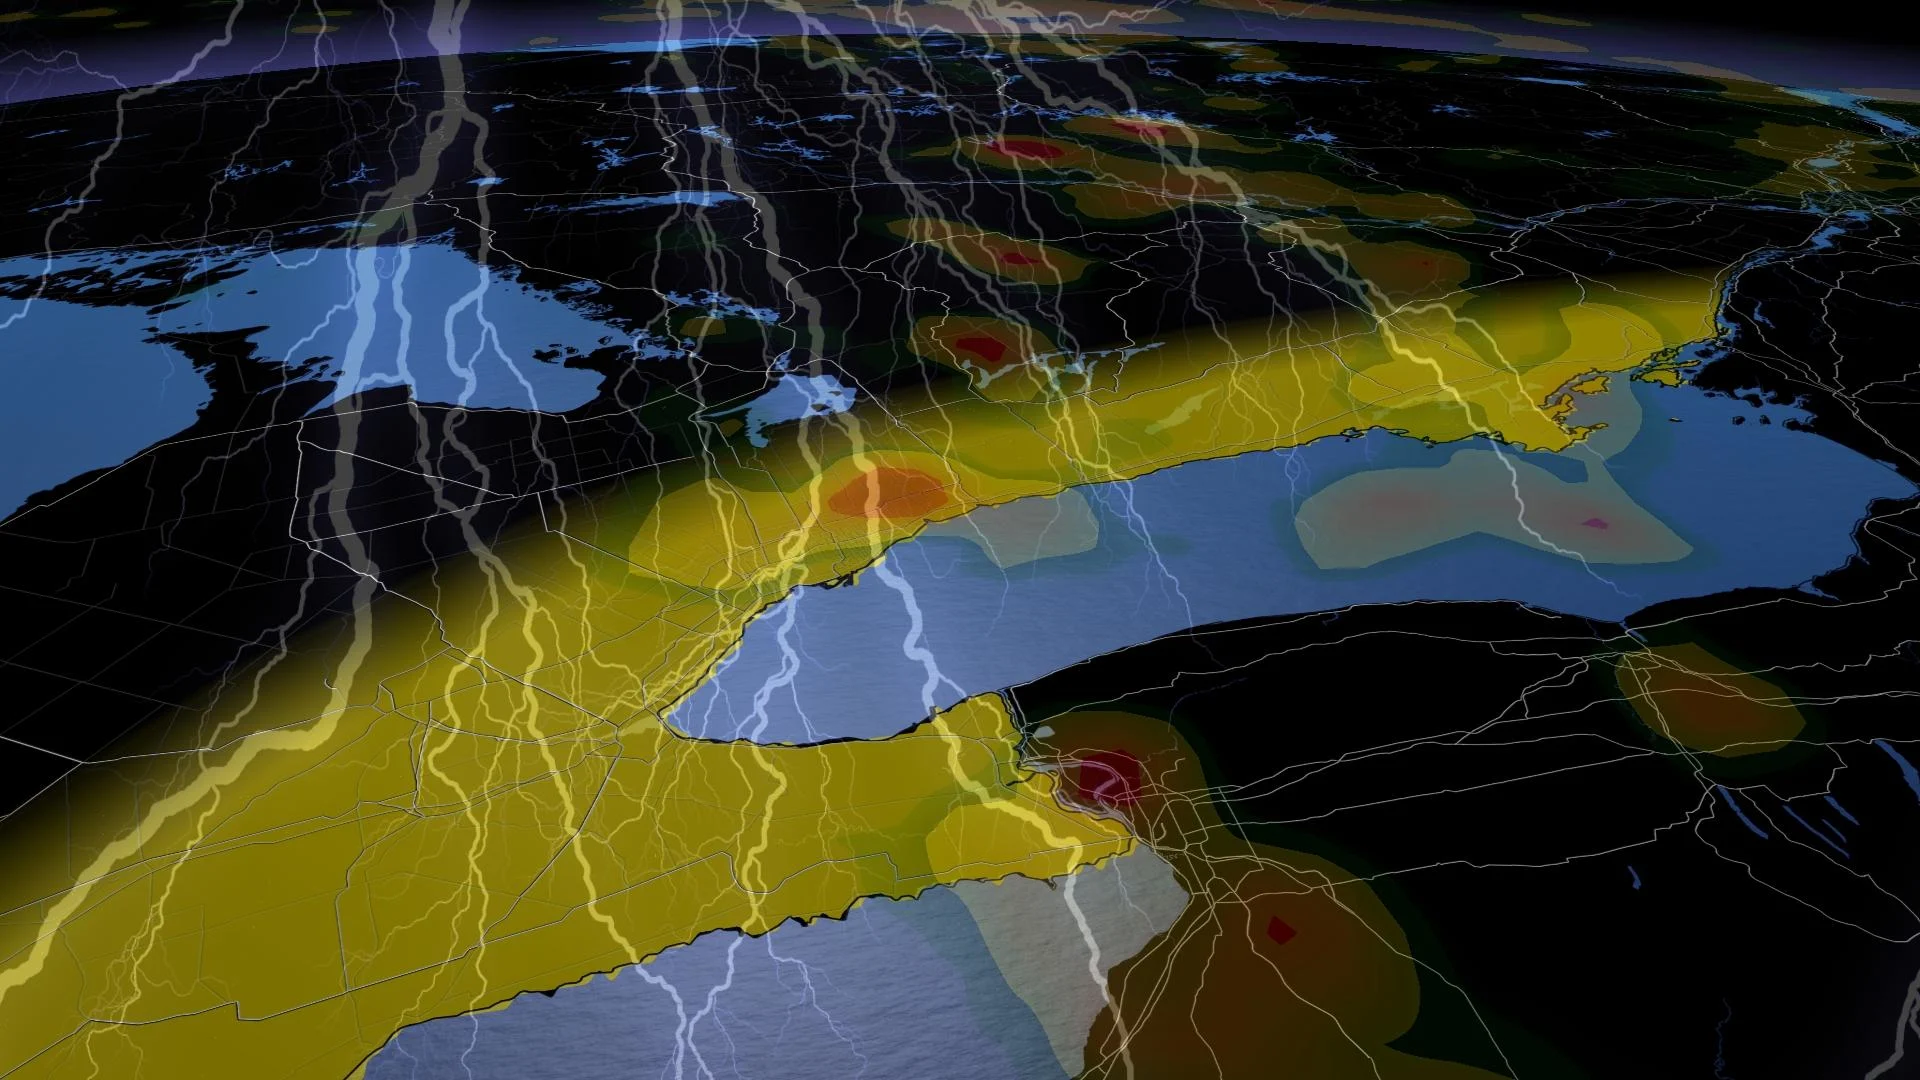 Texas low generates Ontario's first thunderstorm risk of the year